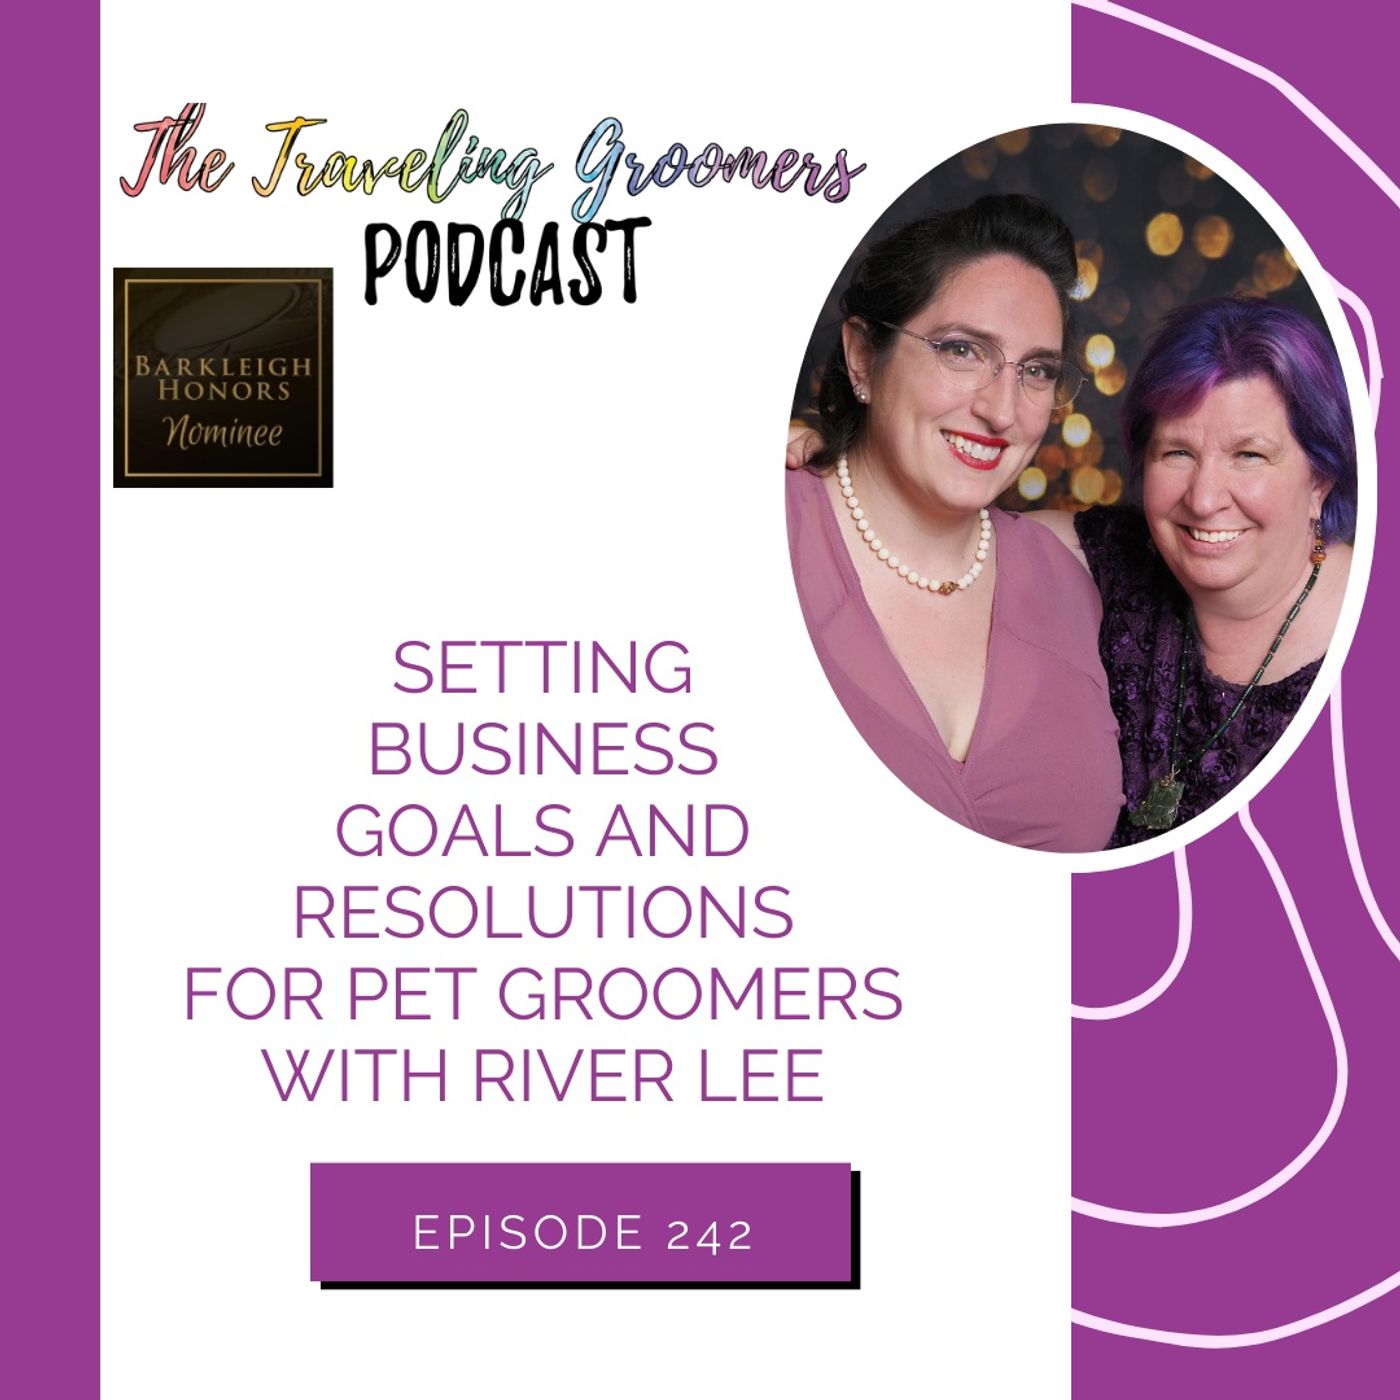 Setting Business Goals and Resolutions for Pet Groomers with River Lee